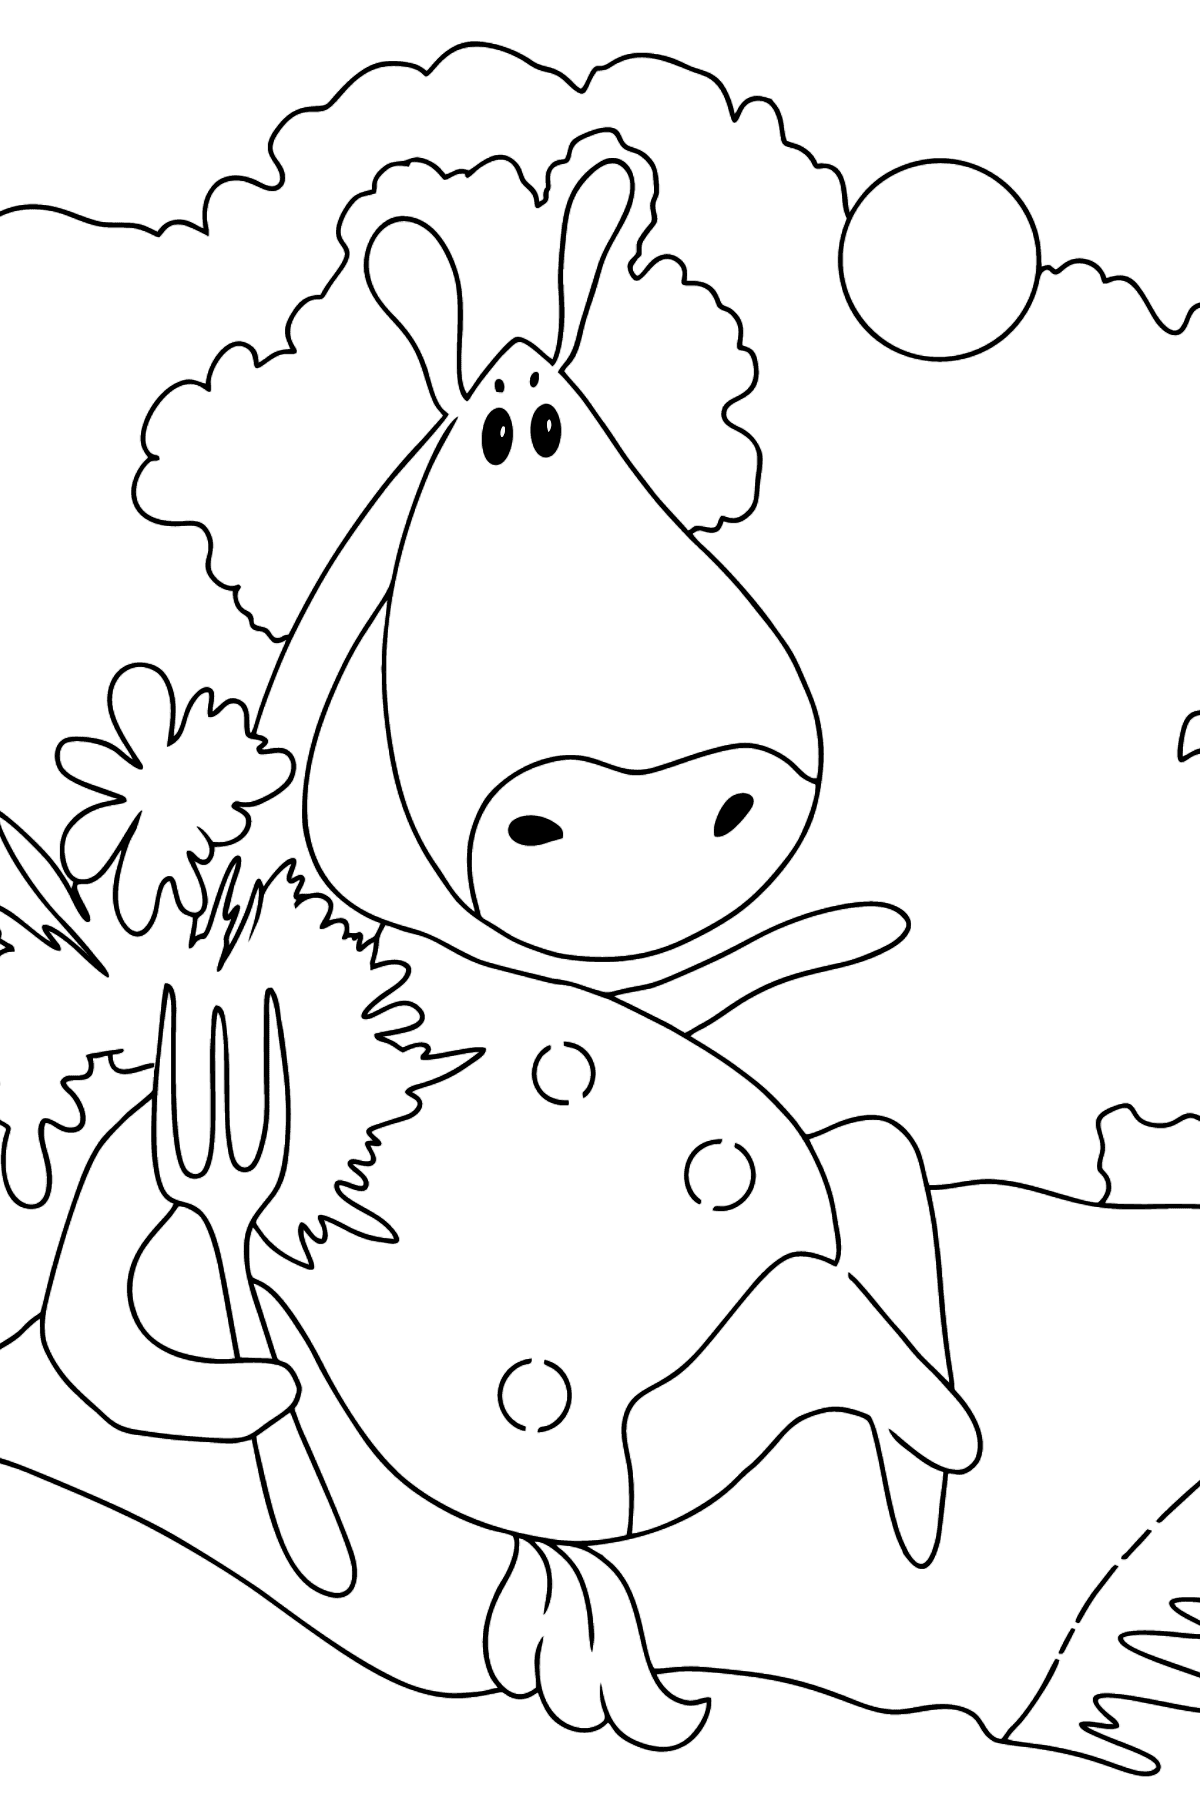 Simple coloring page a horse on the carpet - Coloring Pages for Kids